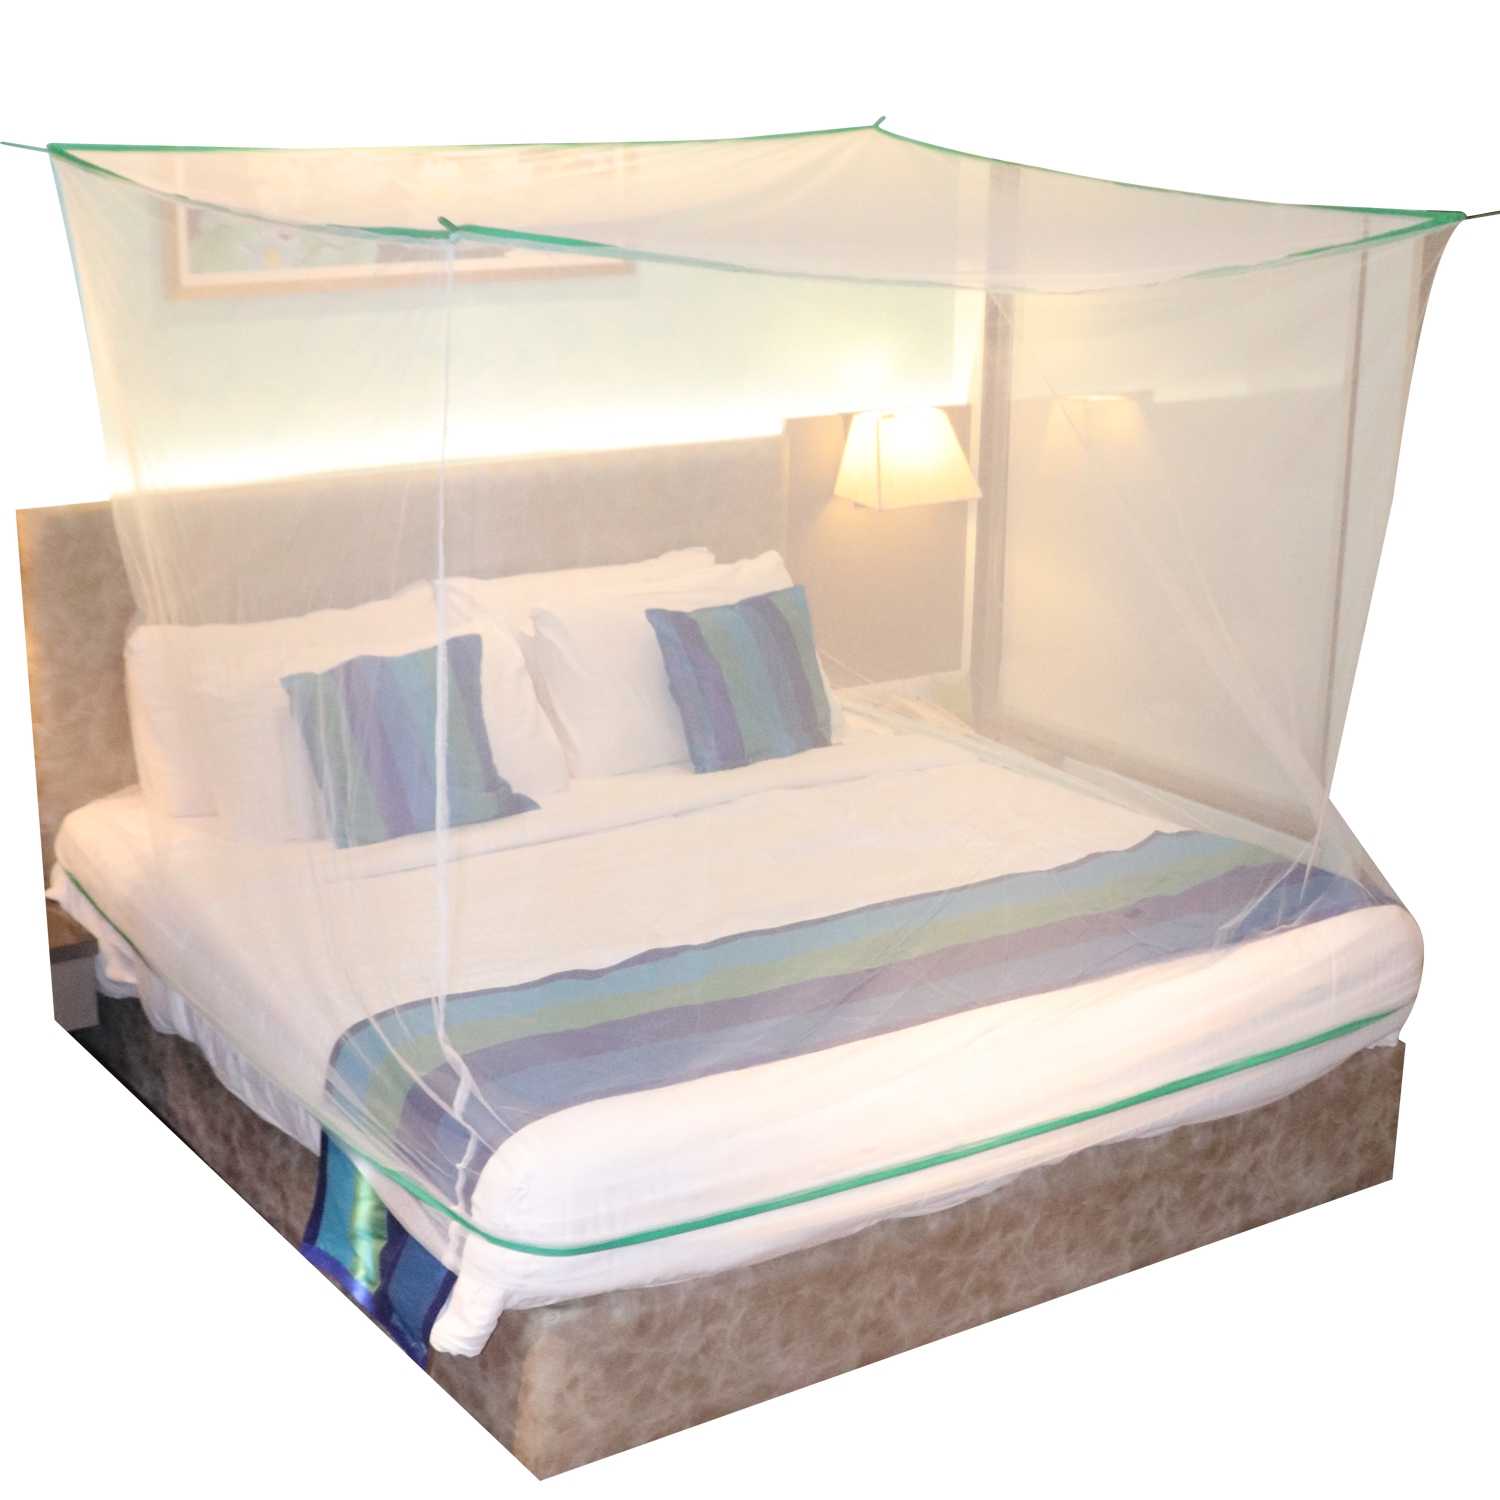 Mosquito Net for Double Bed, King-Size, Square Hanging Foldable Polyester Net White And Green